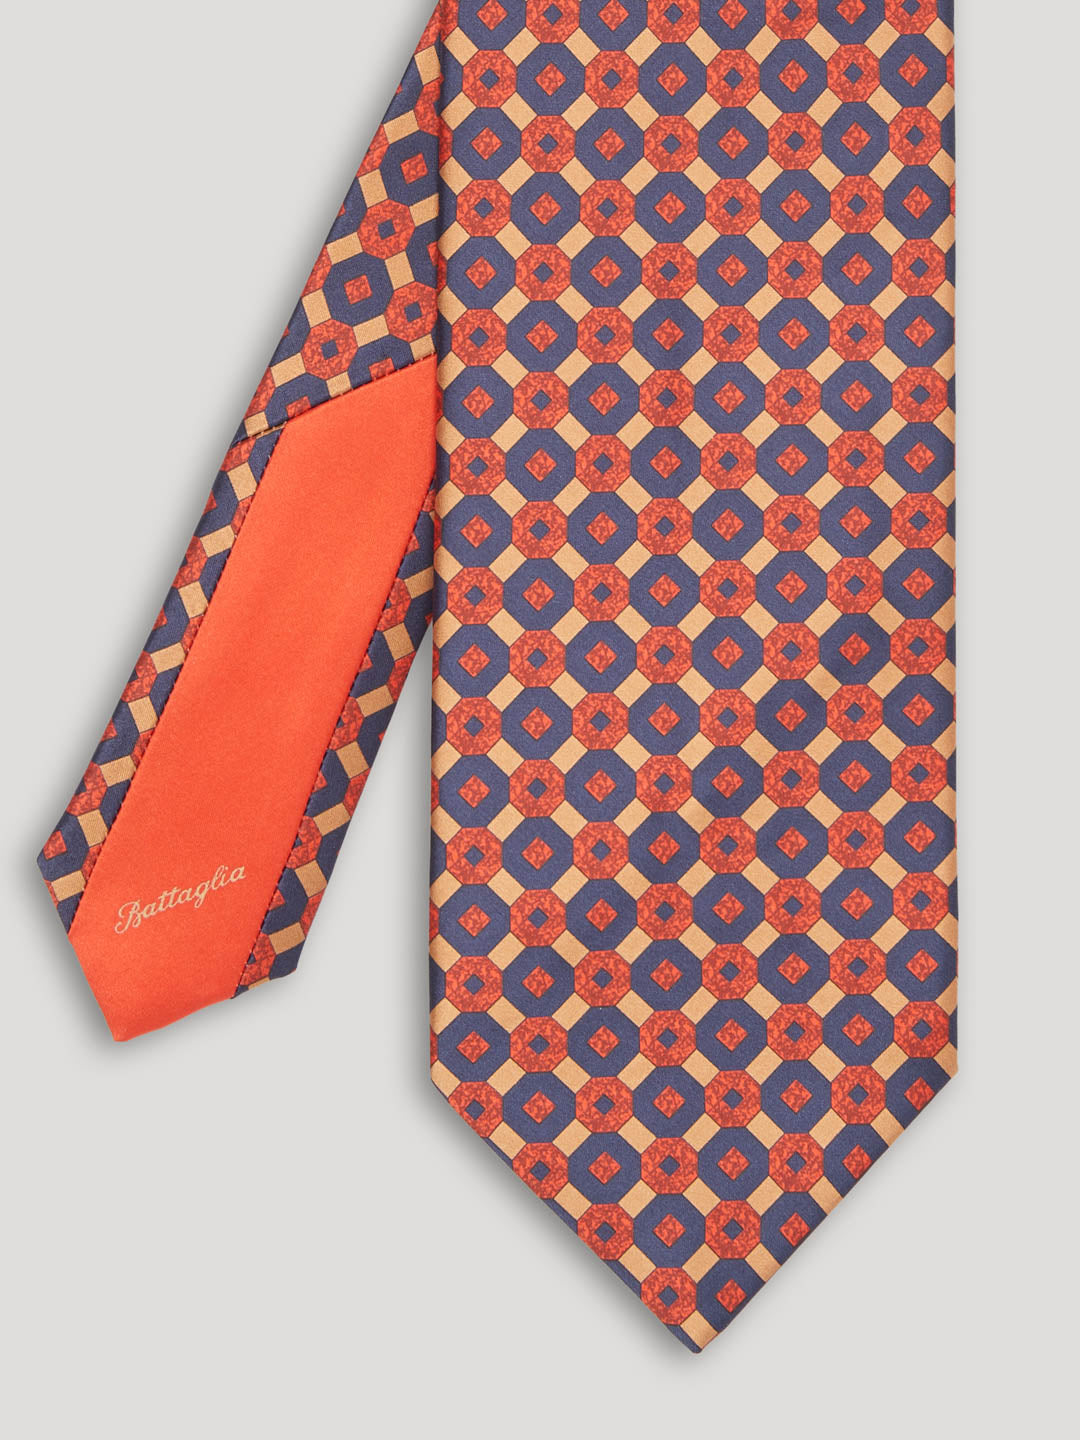 Red, gold and blue tie with large pattern